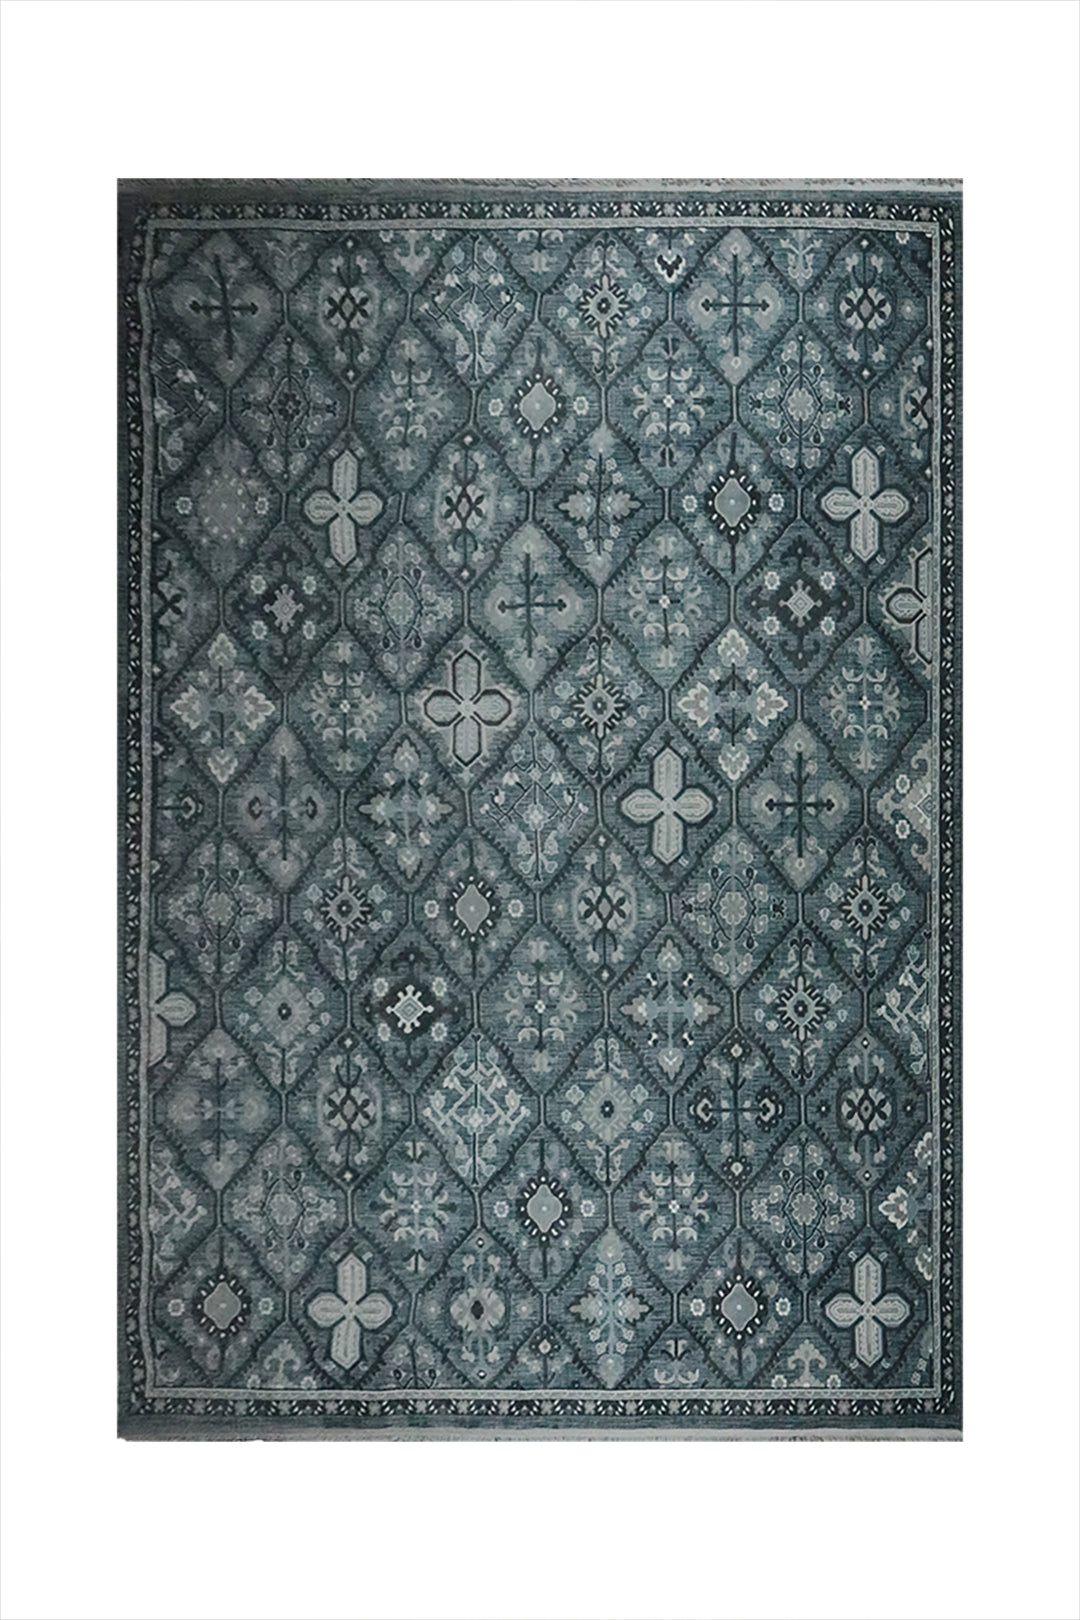 Turkish Modern Festival WD Rug - 7.8 x 9.8 FT - Gray - Sleek and Minimalist for Chic Interiors